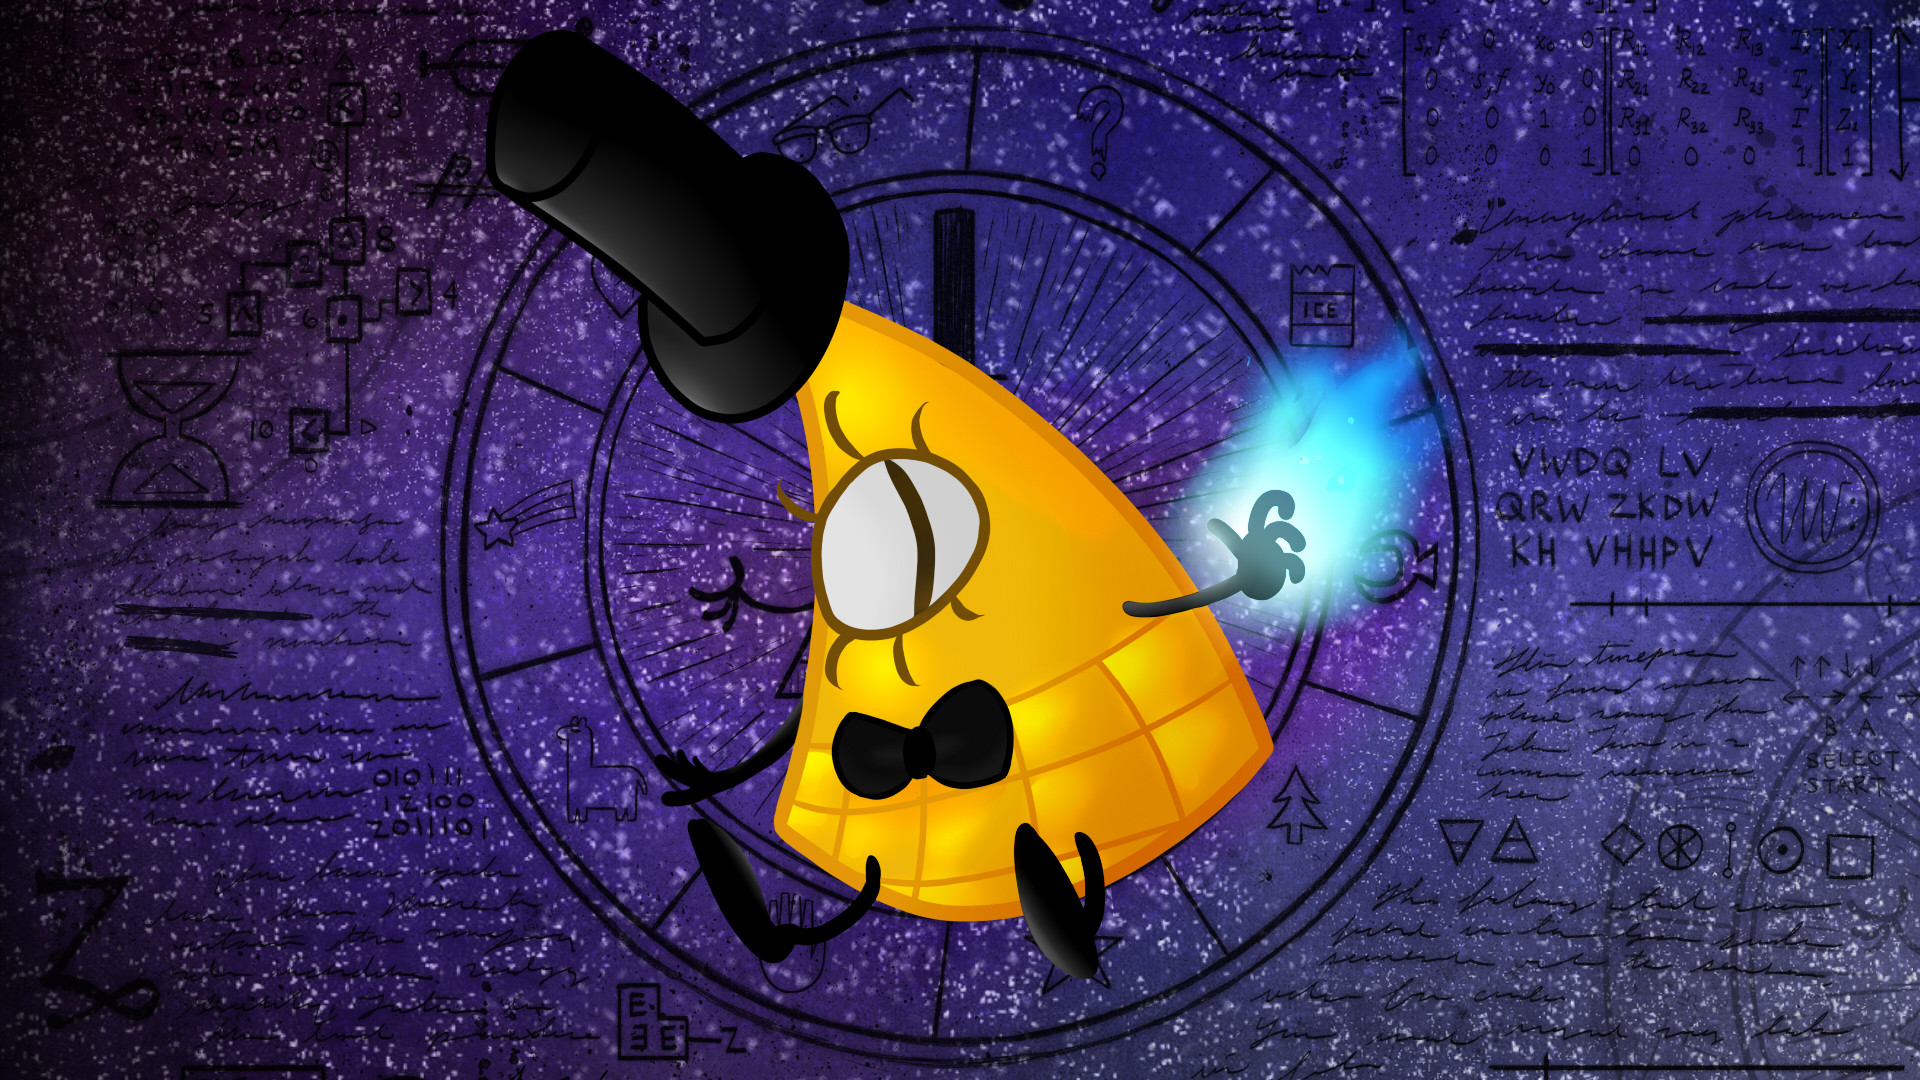 … Bill Cipher Wallpaper – Collab with Meh-Chaan by Nelythia